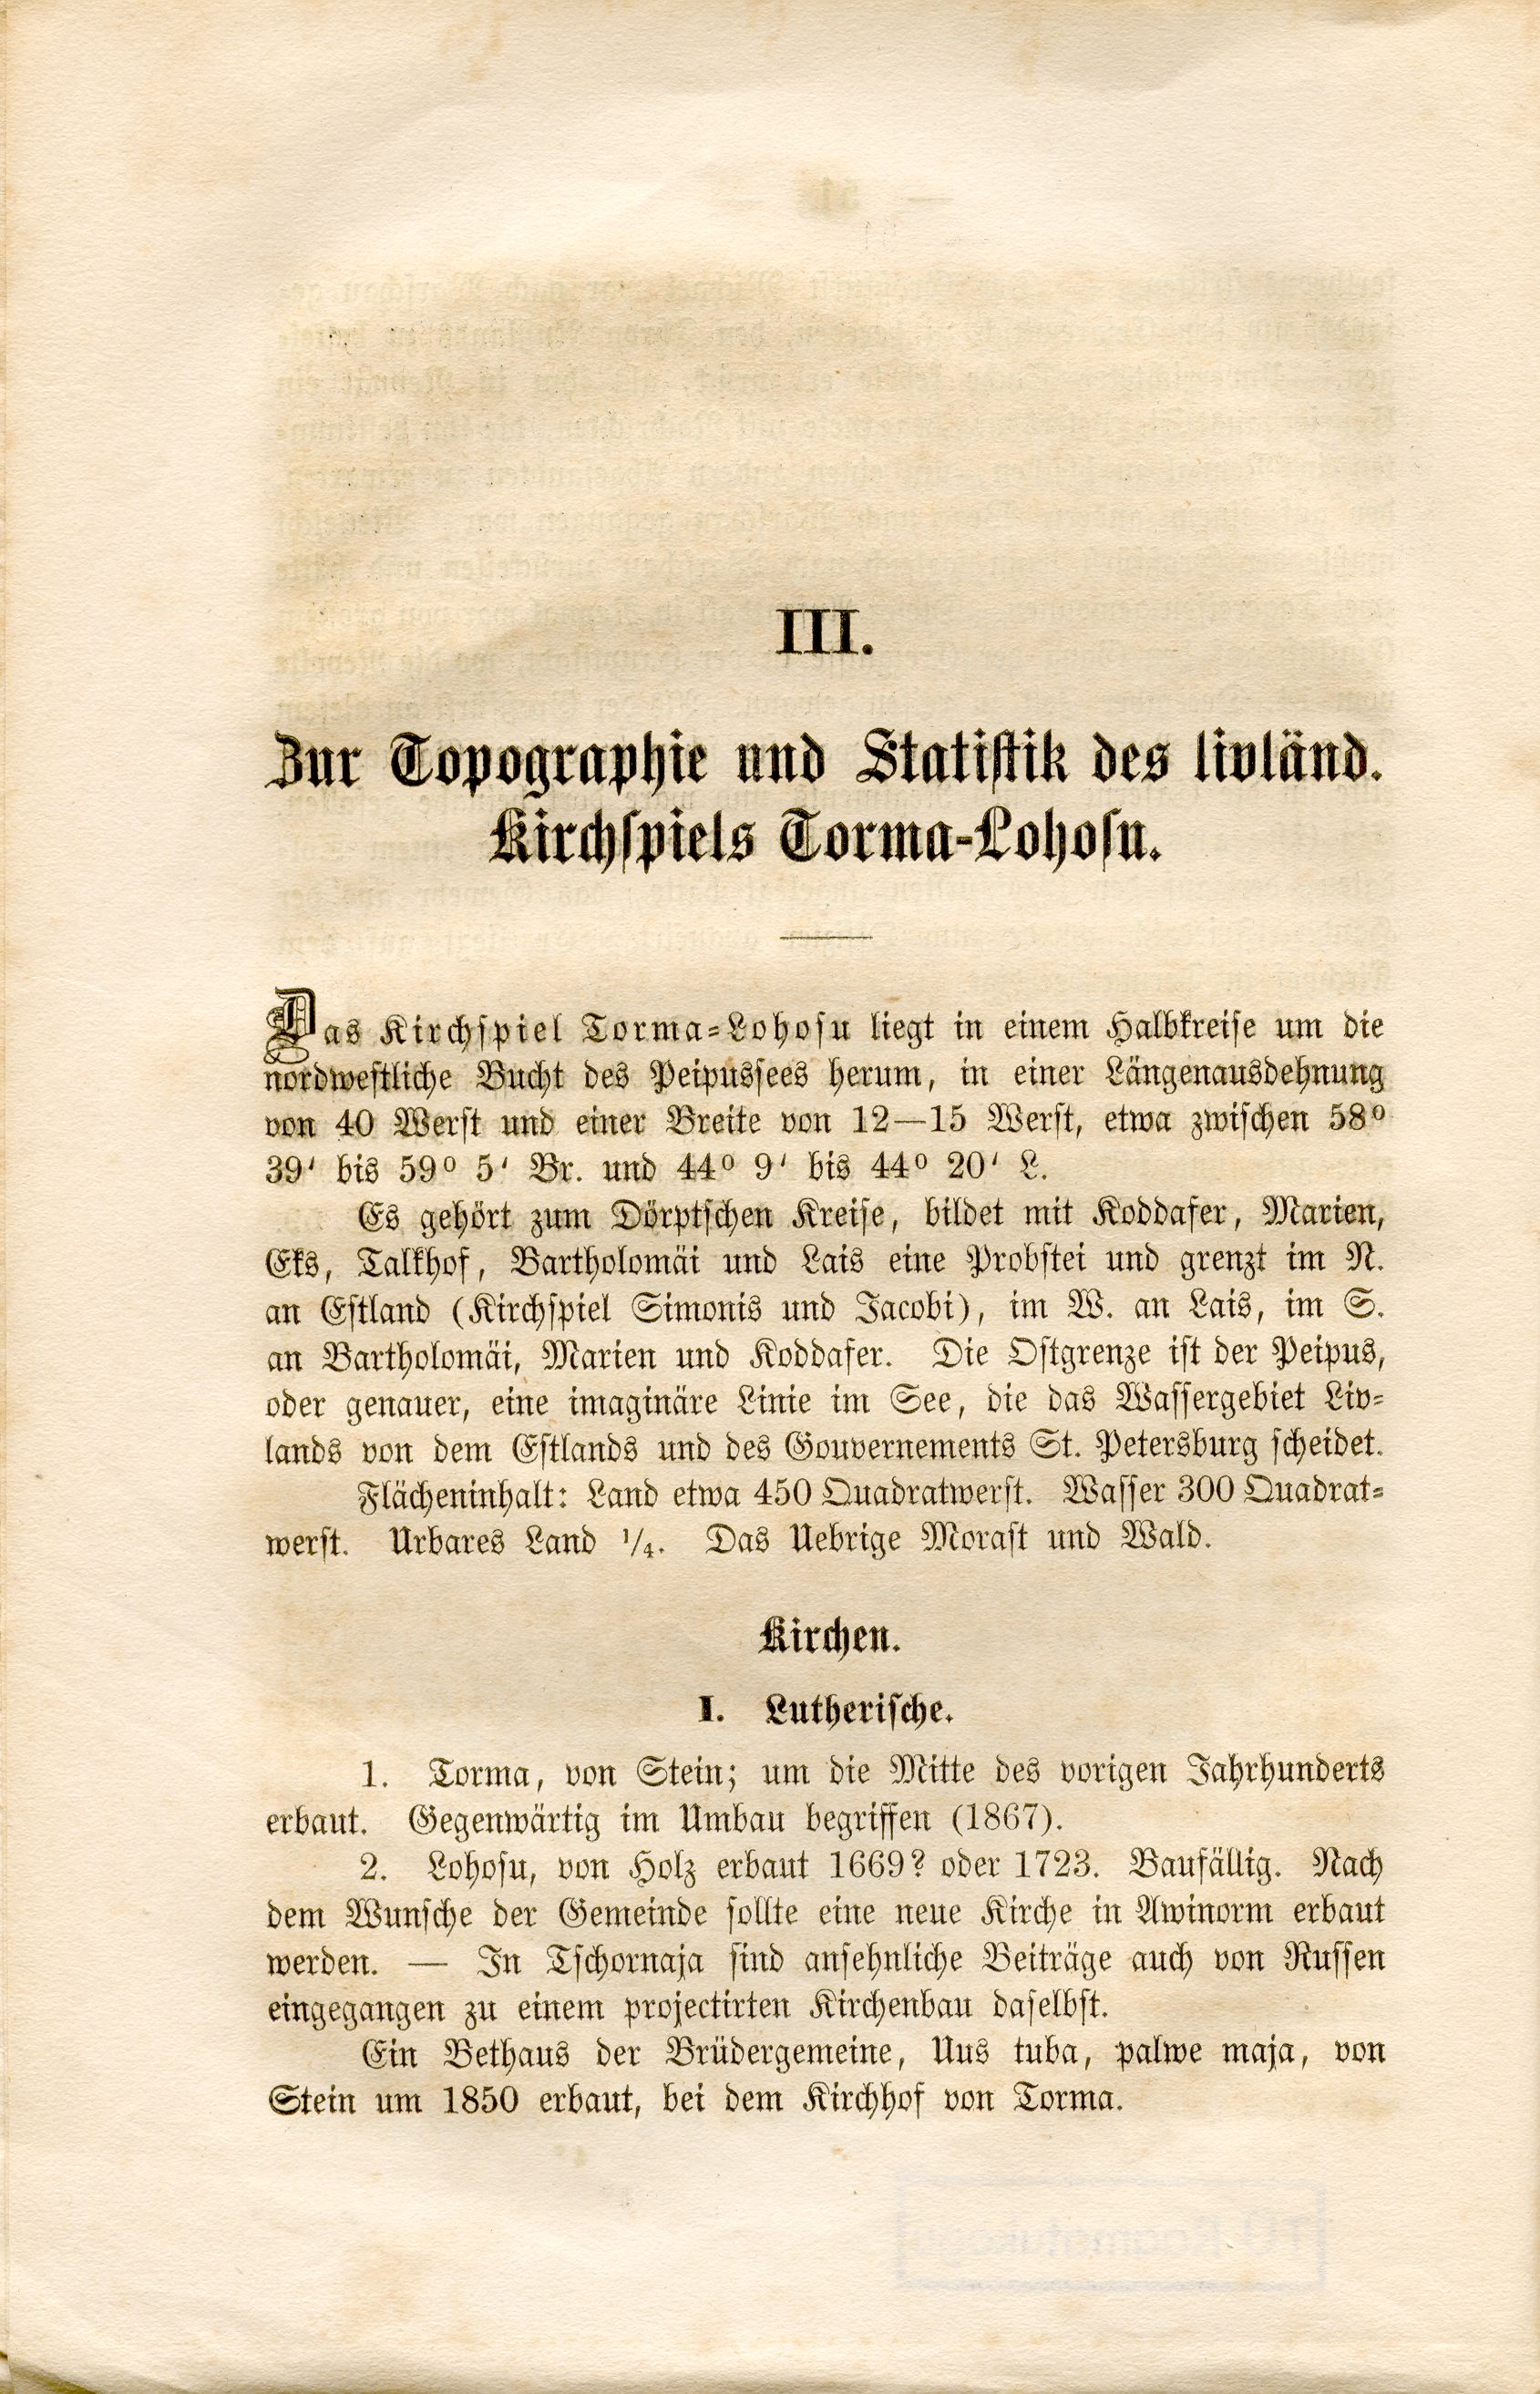 Wagien (1868) | 56. (52) Main body of text